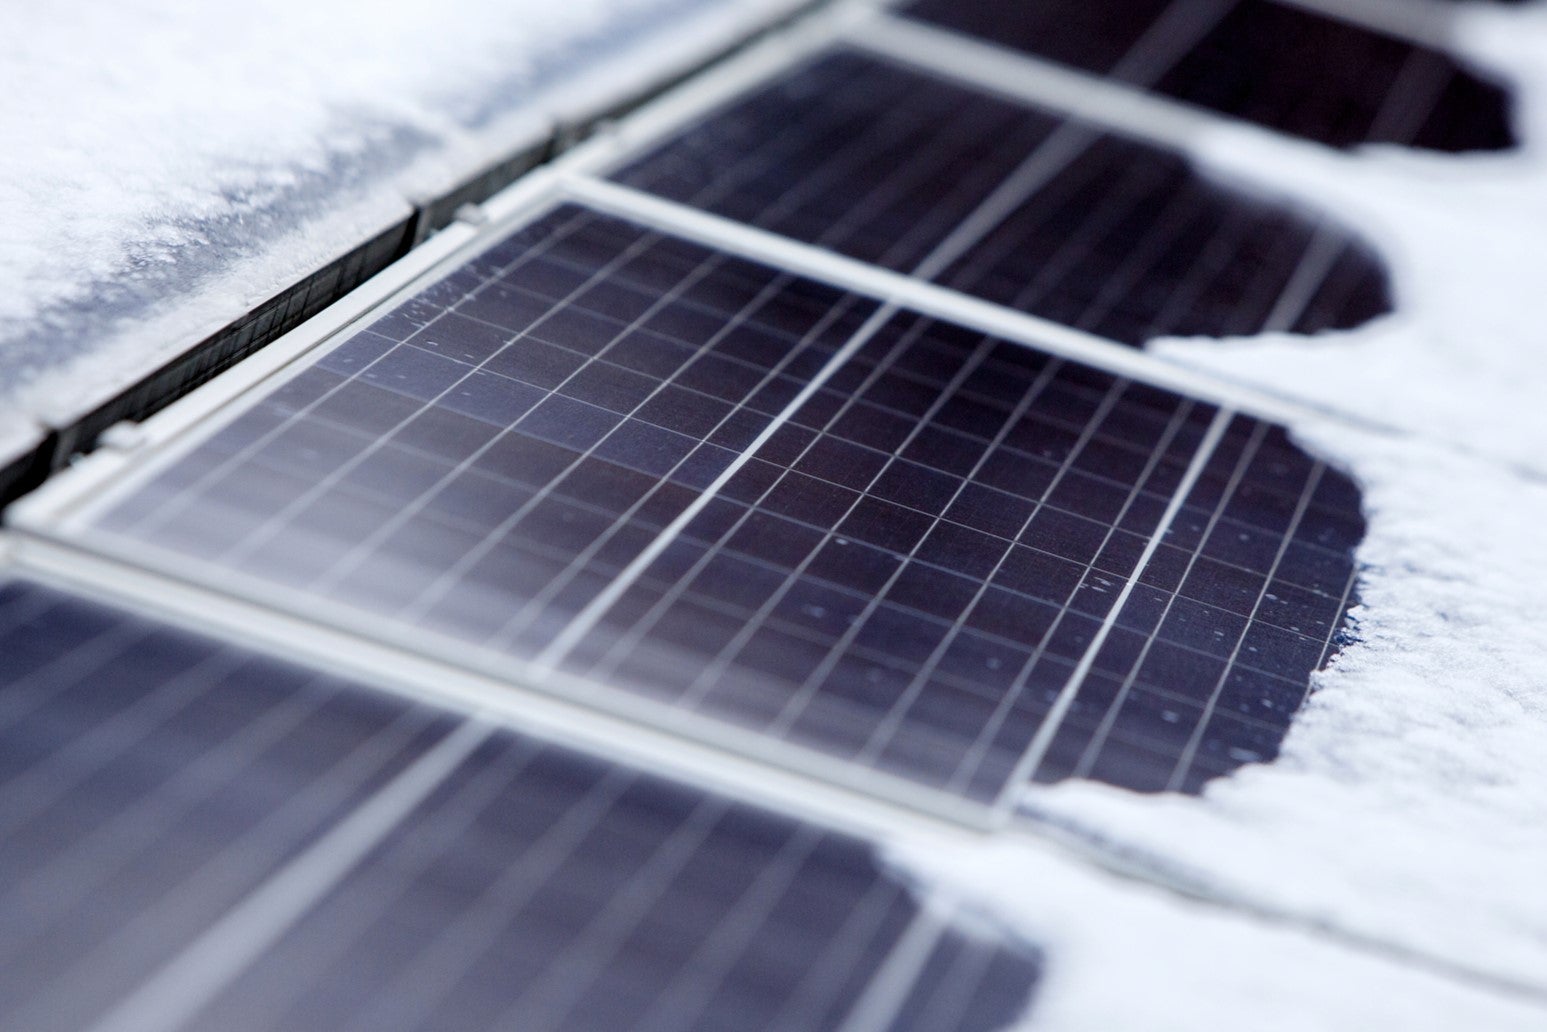 A strip placed at the bottom of solar panels can prevent snow accumulation